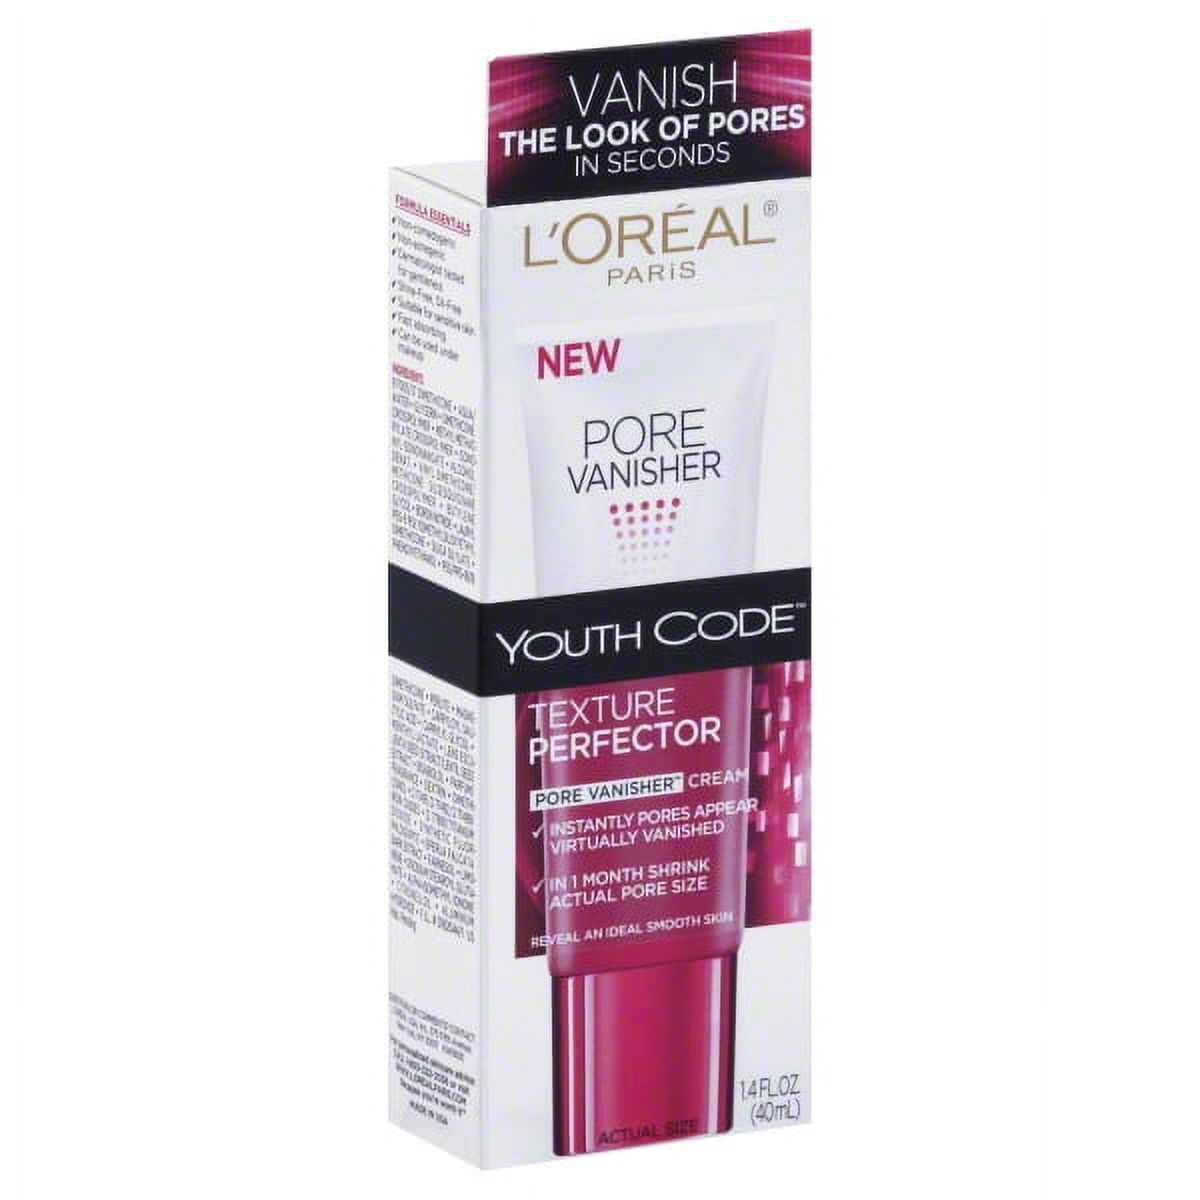 L'Oreal Loreal Youth Code Texture Perfector, 1.4 oz - image 1 of 3